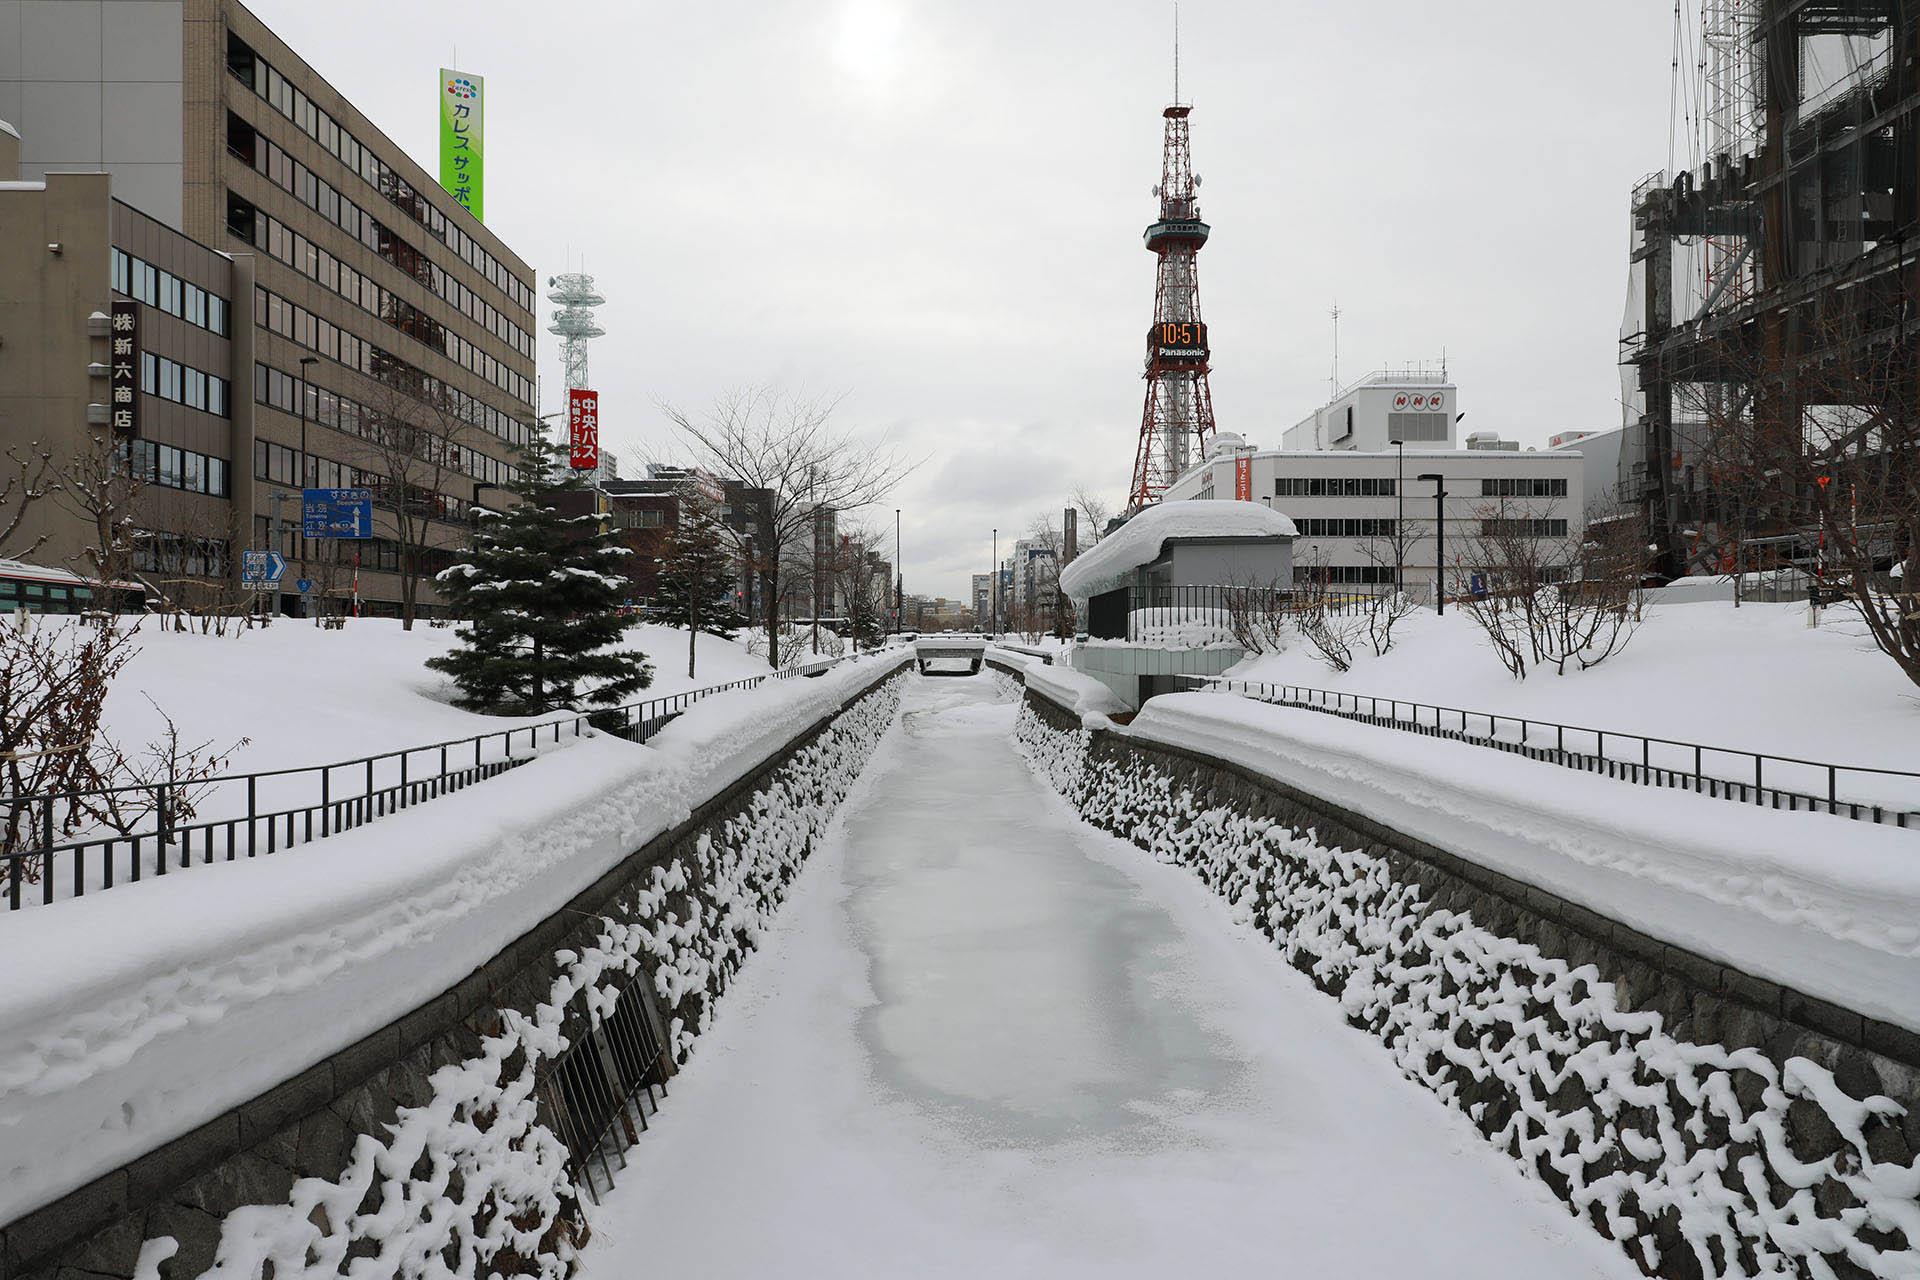 A snow-covered landscape in Sapporo